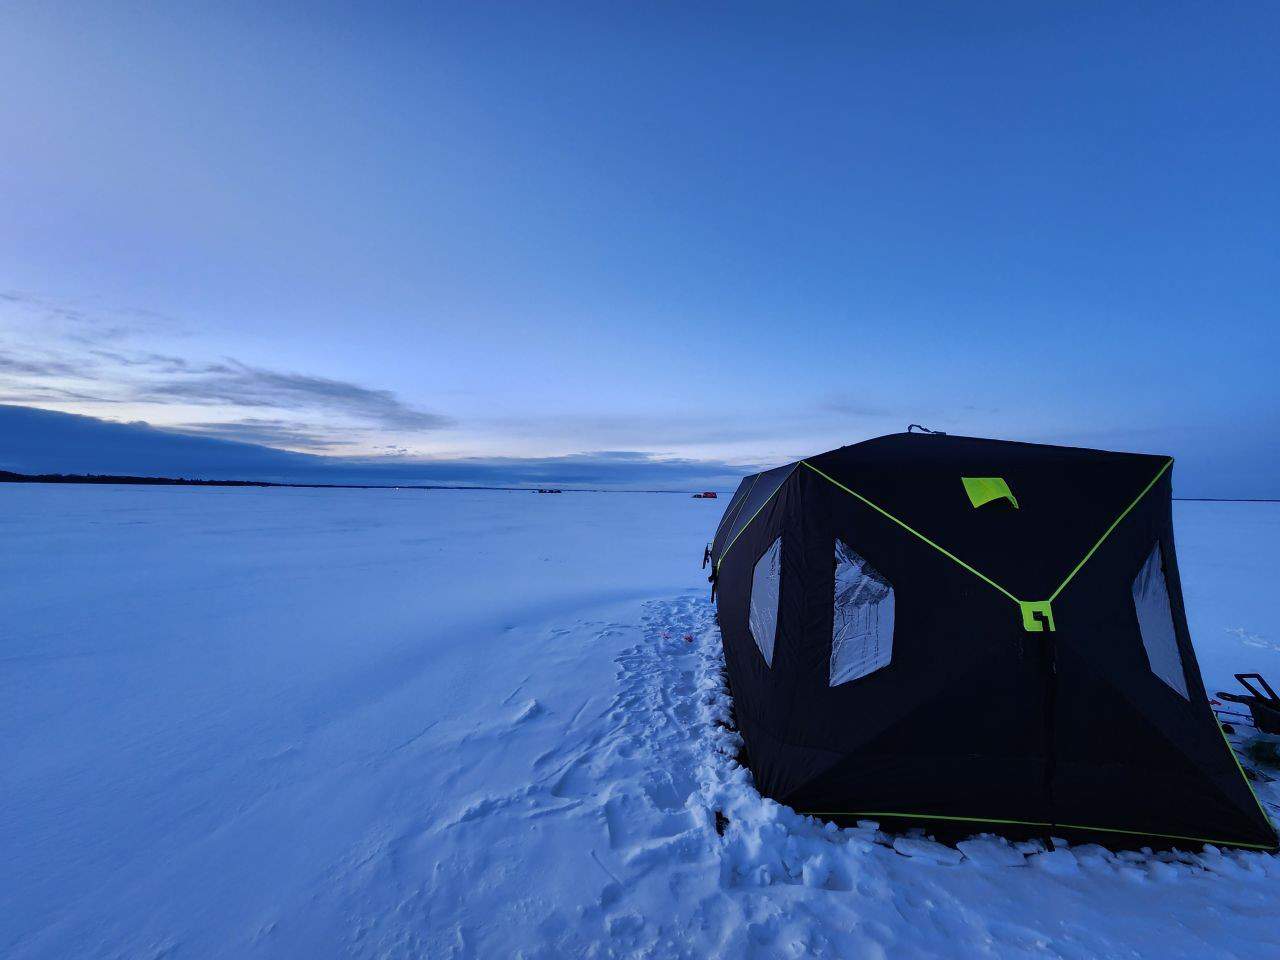 Ice fishing on Buffalo Lake Alberta Canada. An ice hut will keep you out of the elements to enjoy a day of ice fishing